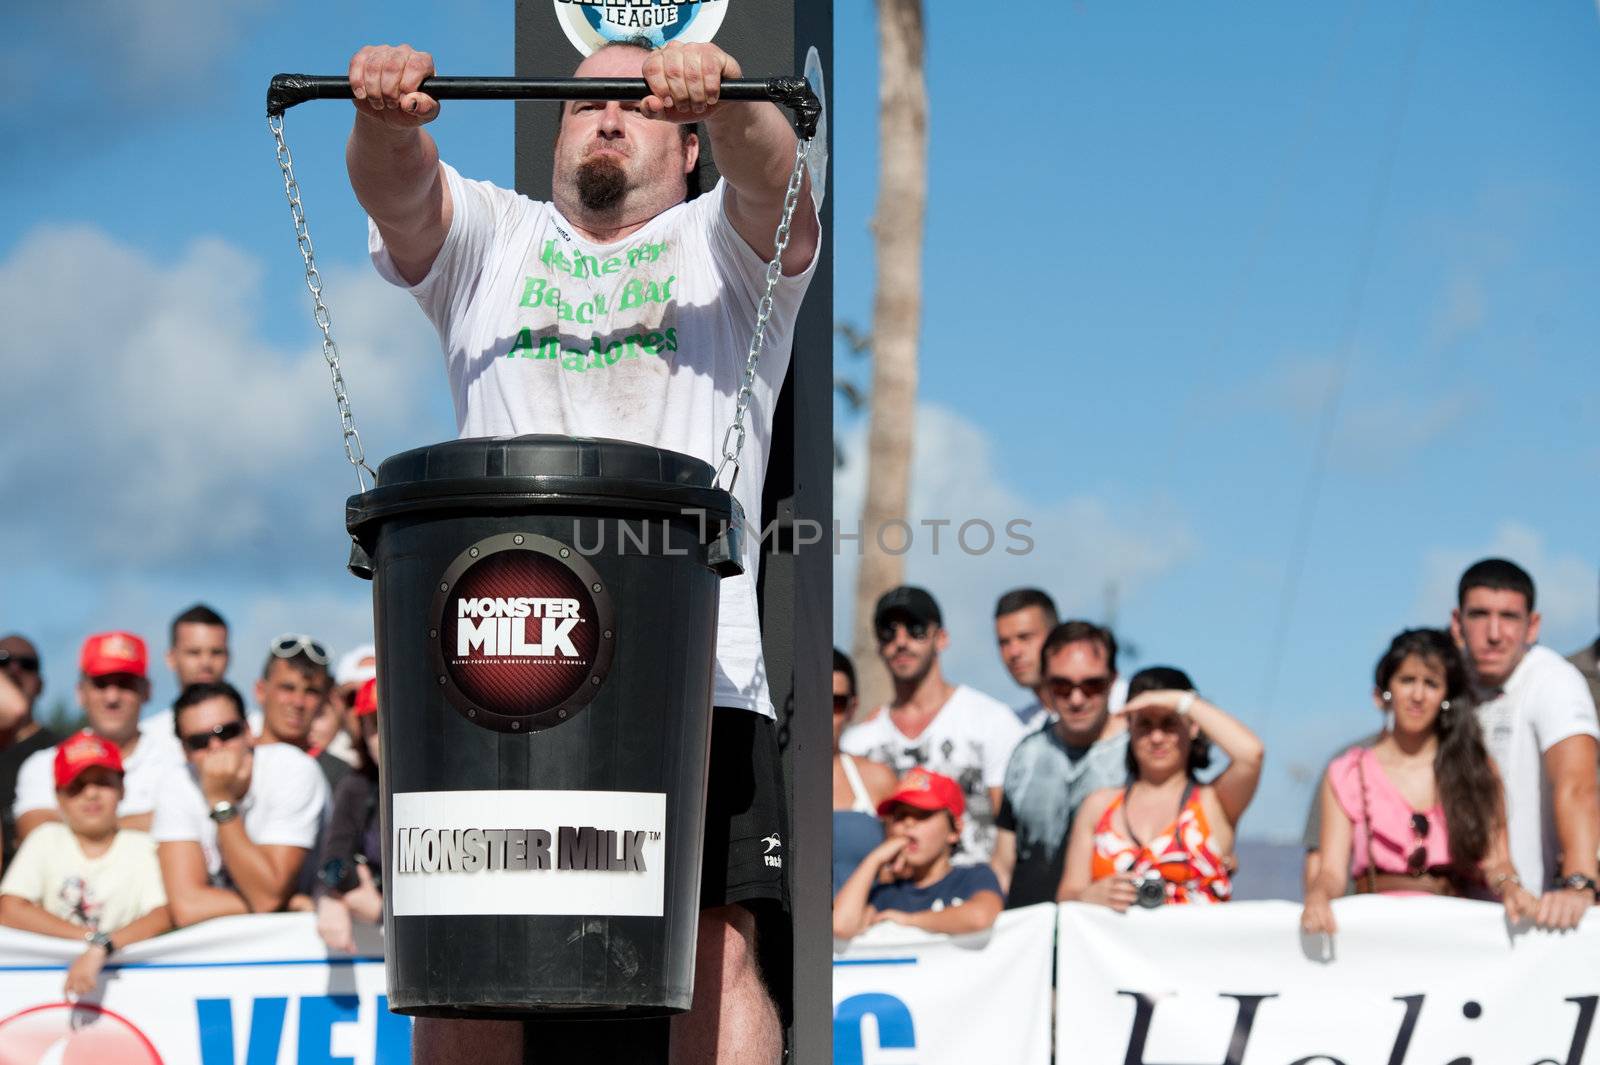 CANARY ISLANDS - SEPTEMBER 03: Julio Jimenez Zancajo from Spain lifting a heavy trash can for longest possible time during Strongman Champions League in Las Palmas September 03, 2011 in Canary Islands, Spain